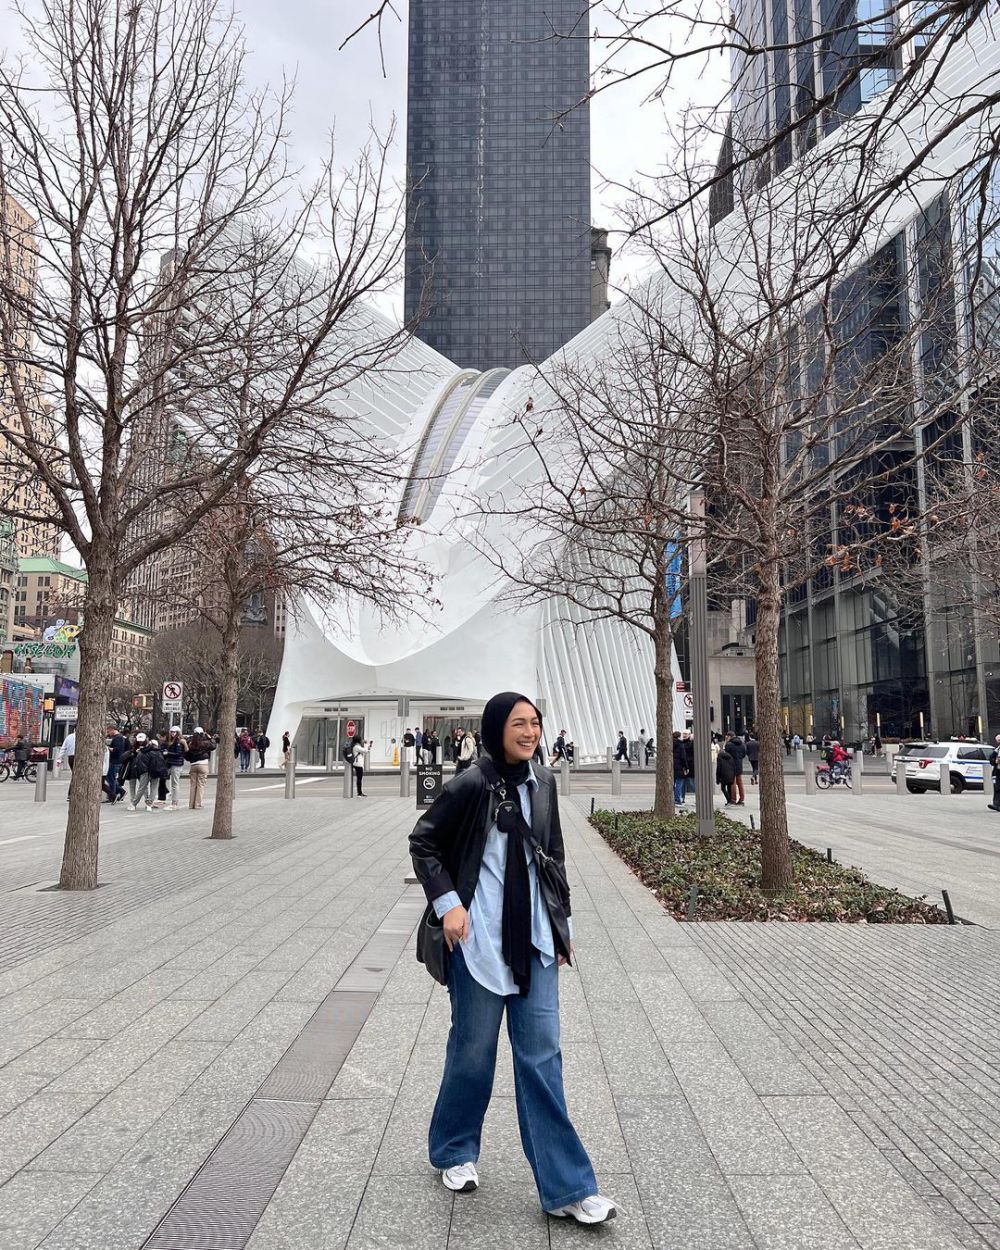 8 Ide Styling Outfit Travelling ala Bella Attamimi, Super Stylish!